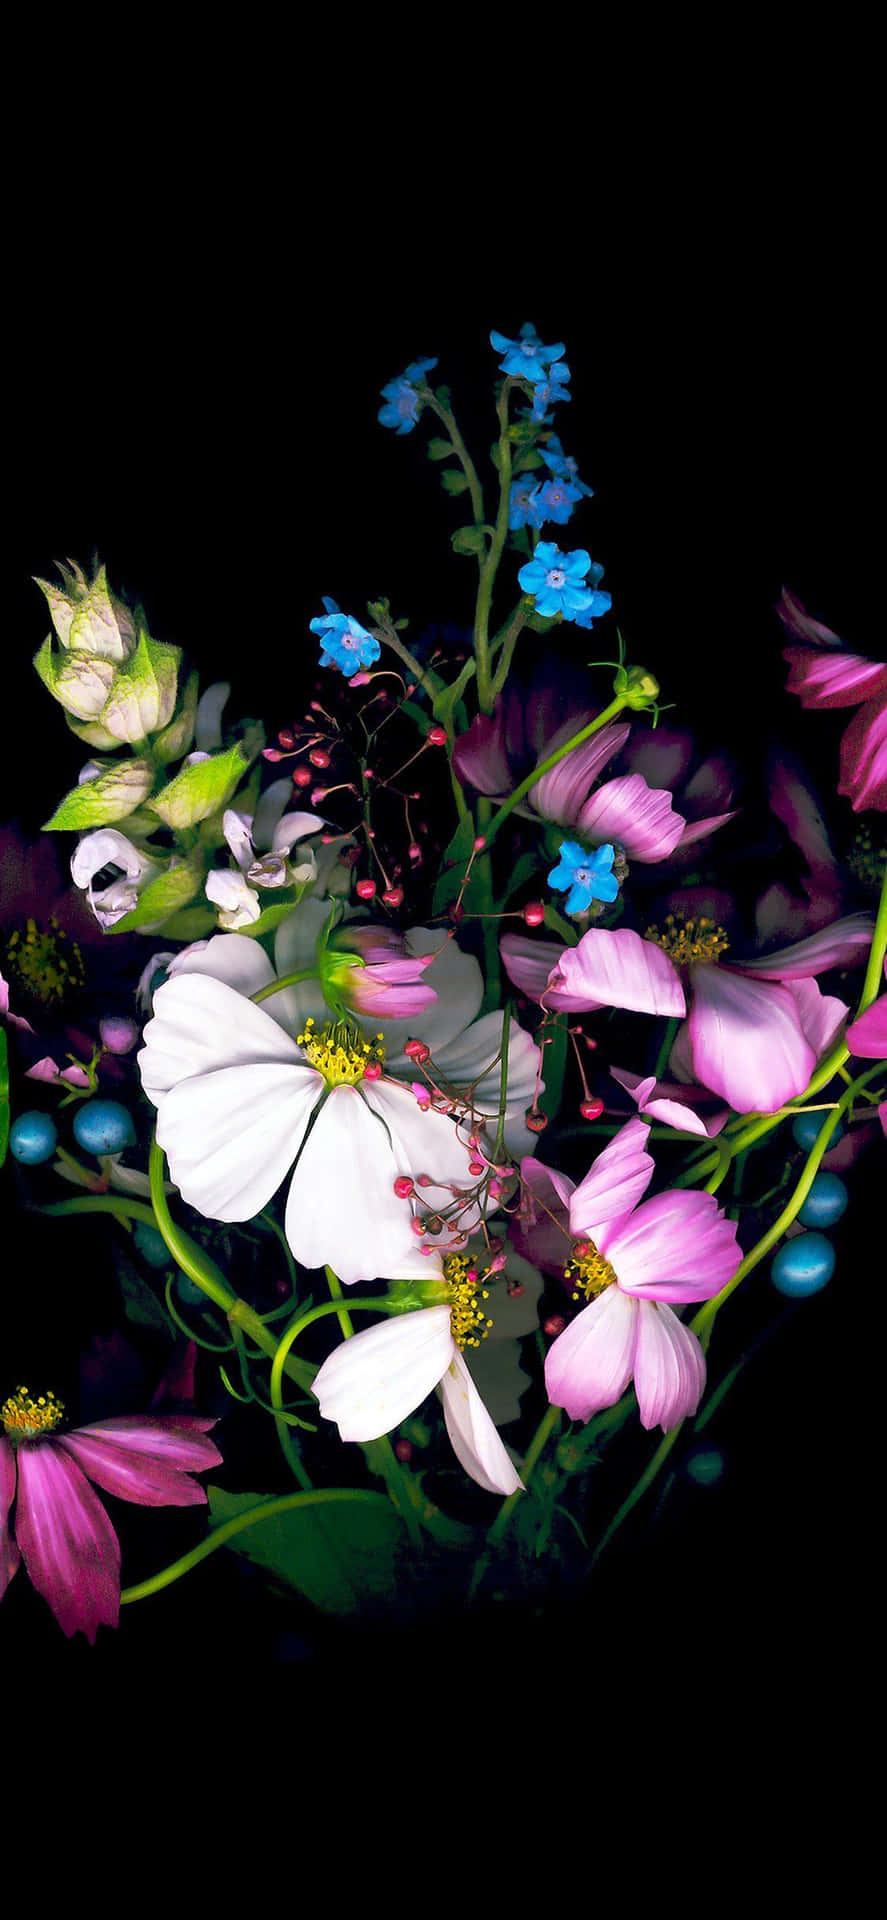 Iphone Blomster 1125 X 2436 Wallpaper